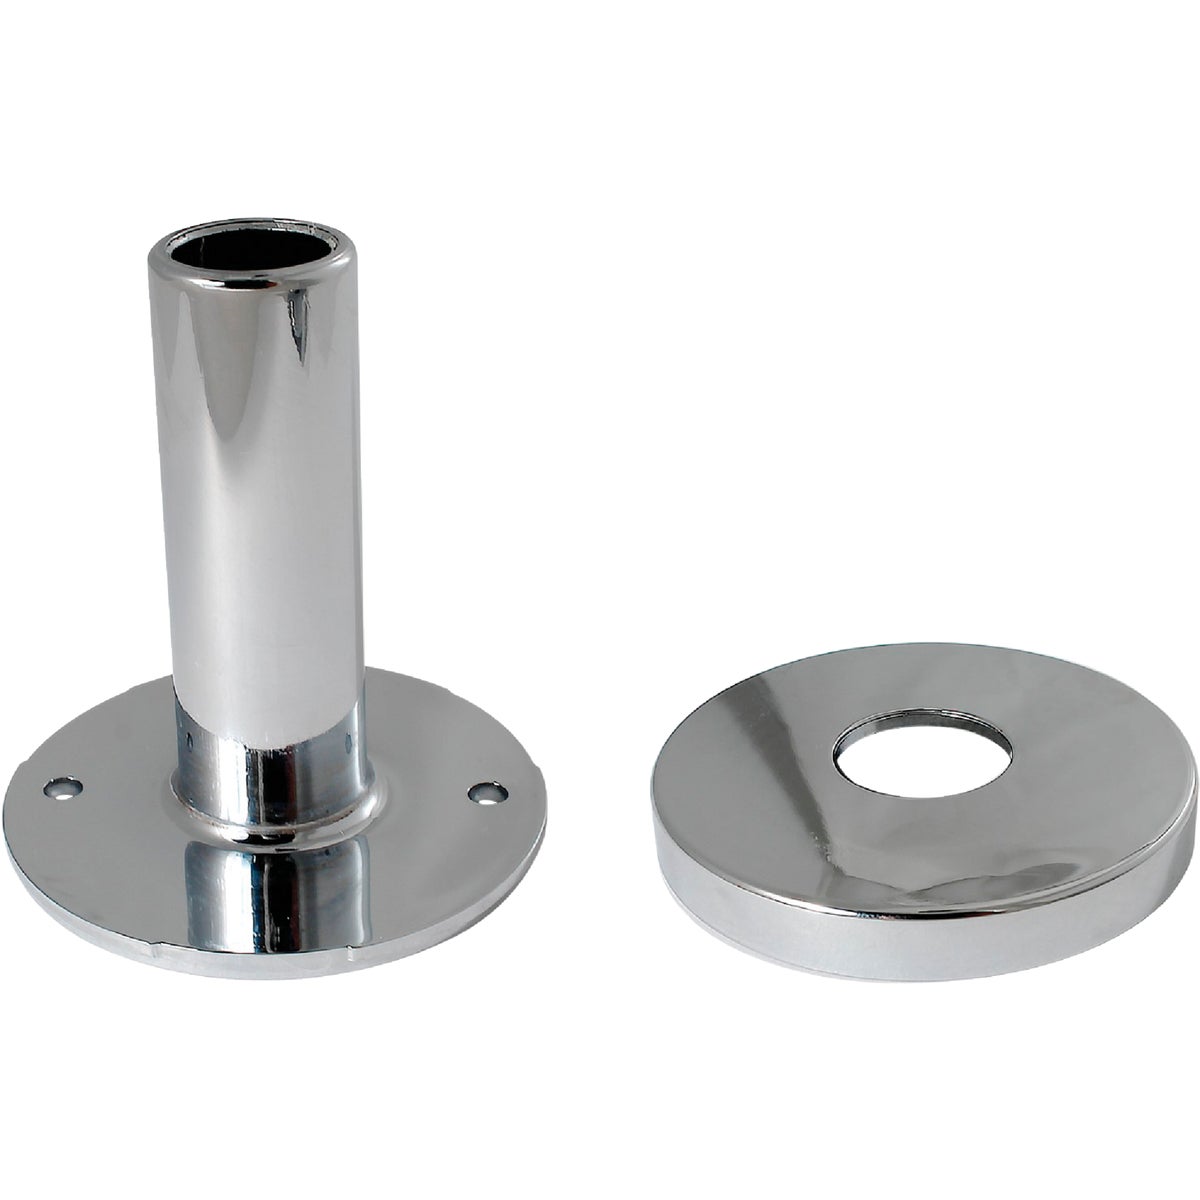 Item 482783, The Keeney flanged tube and hardware covers the rough-in hole and rough 